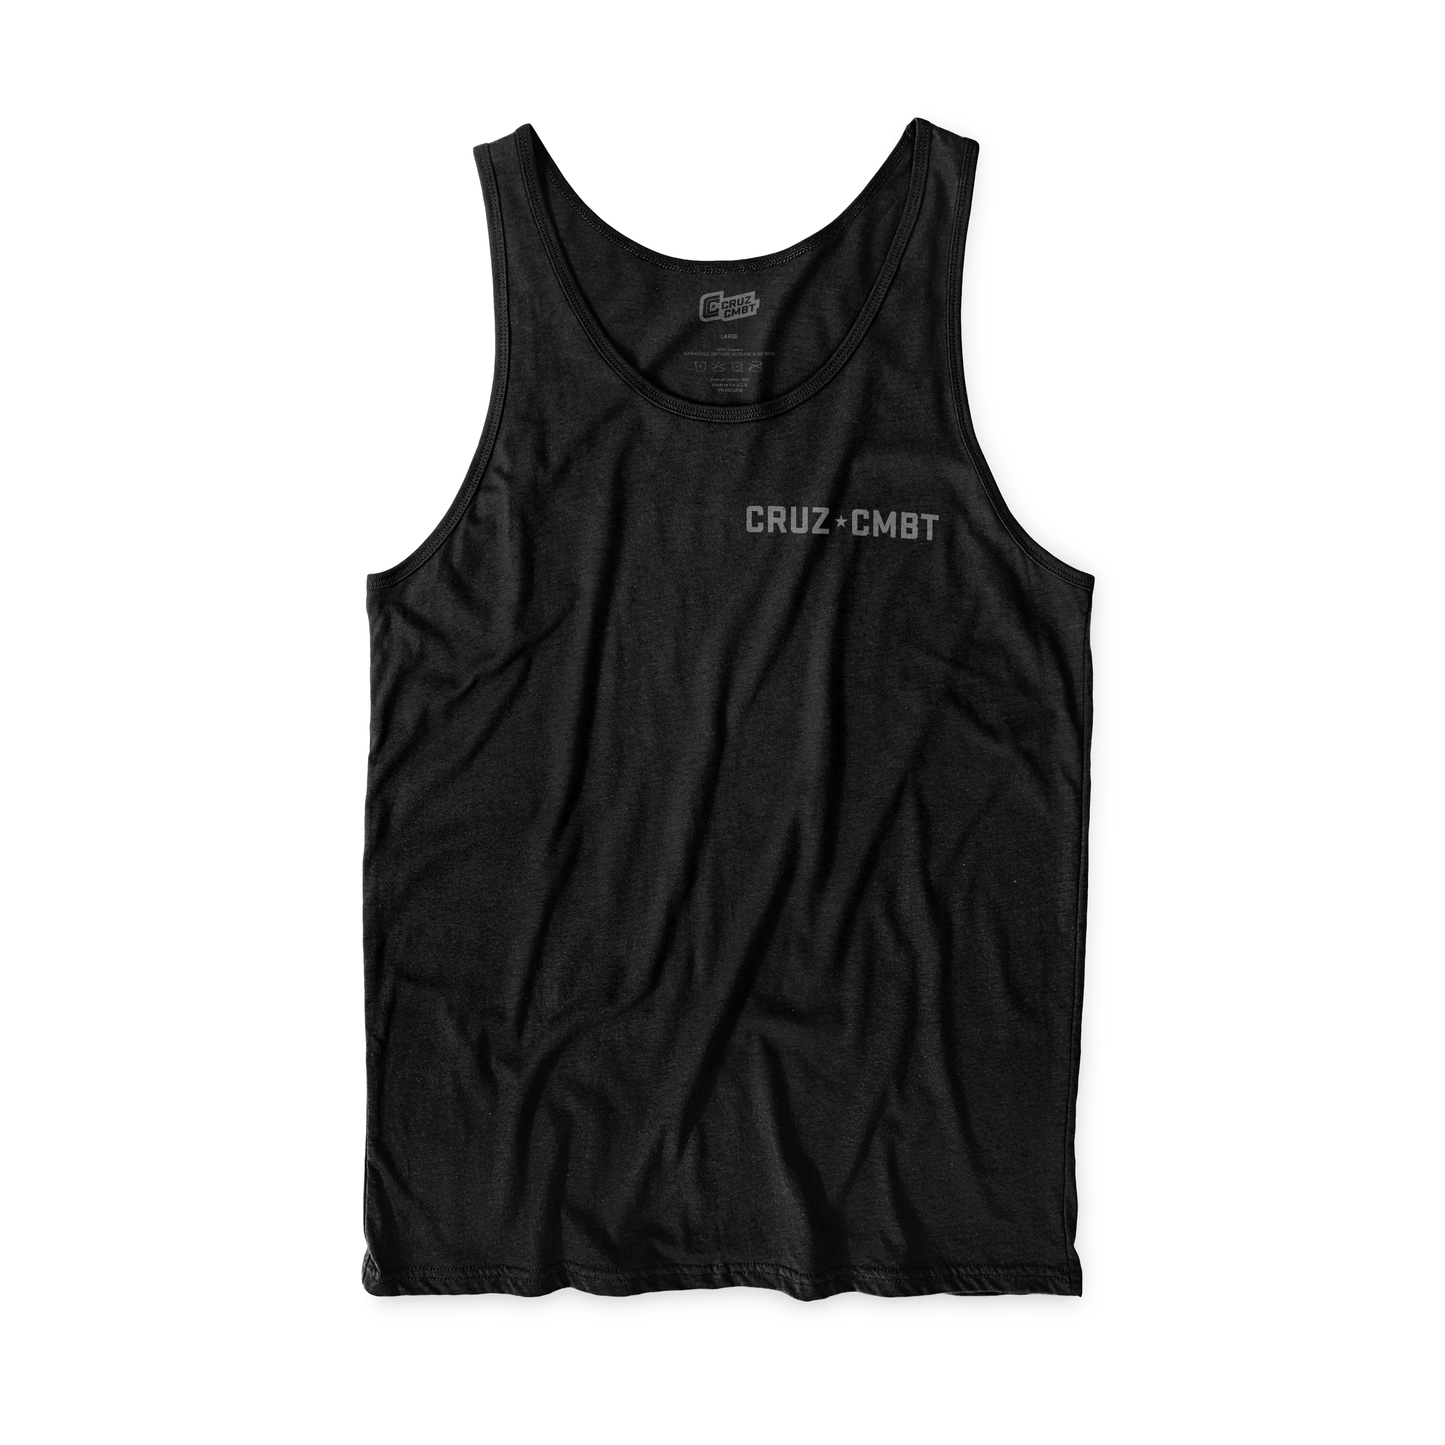 Base Collection men's performance tank, stealth